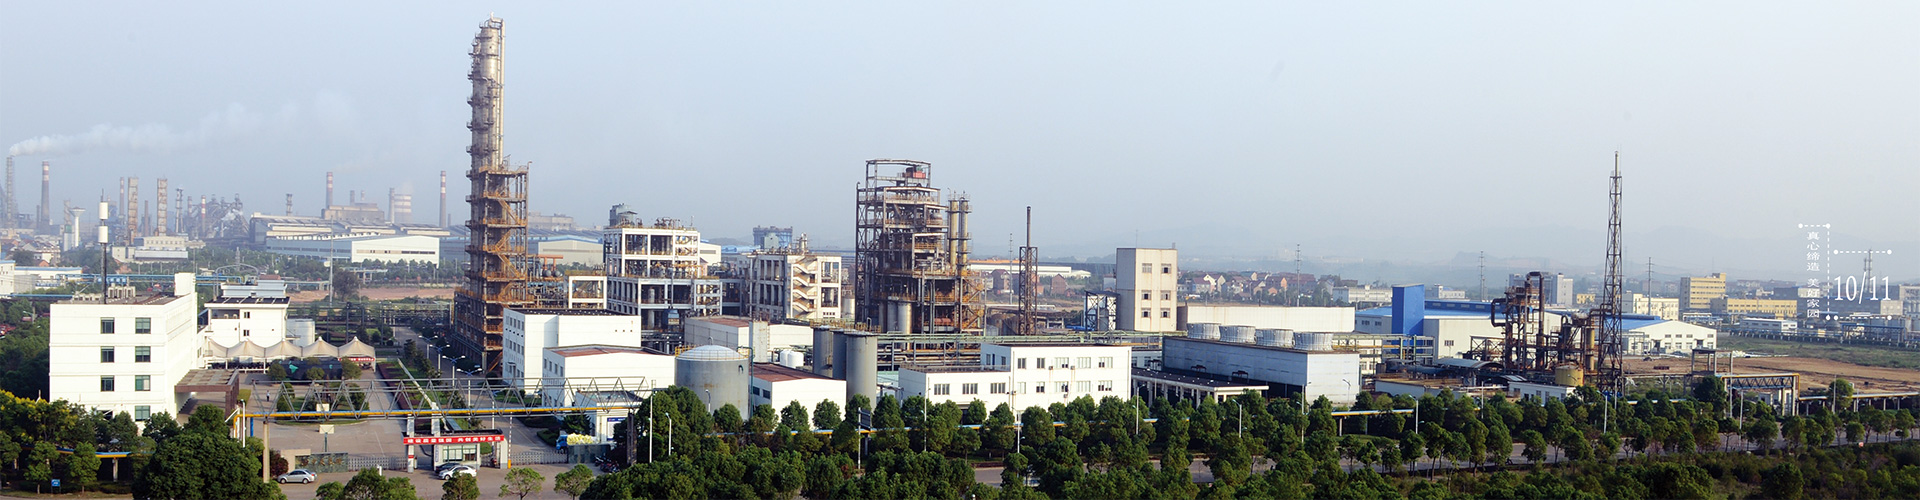 OUR INDUSTRIAL PARK